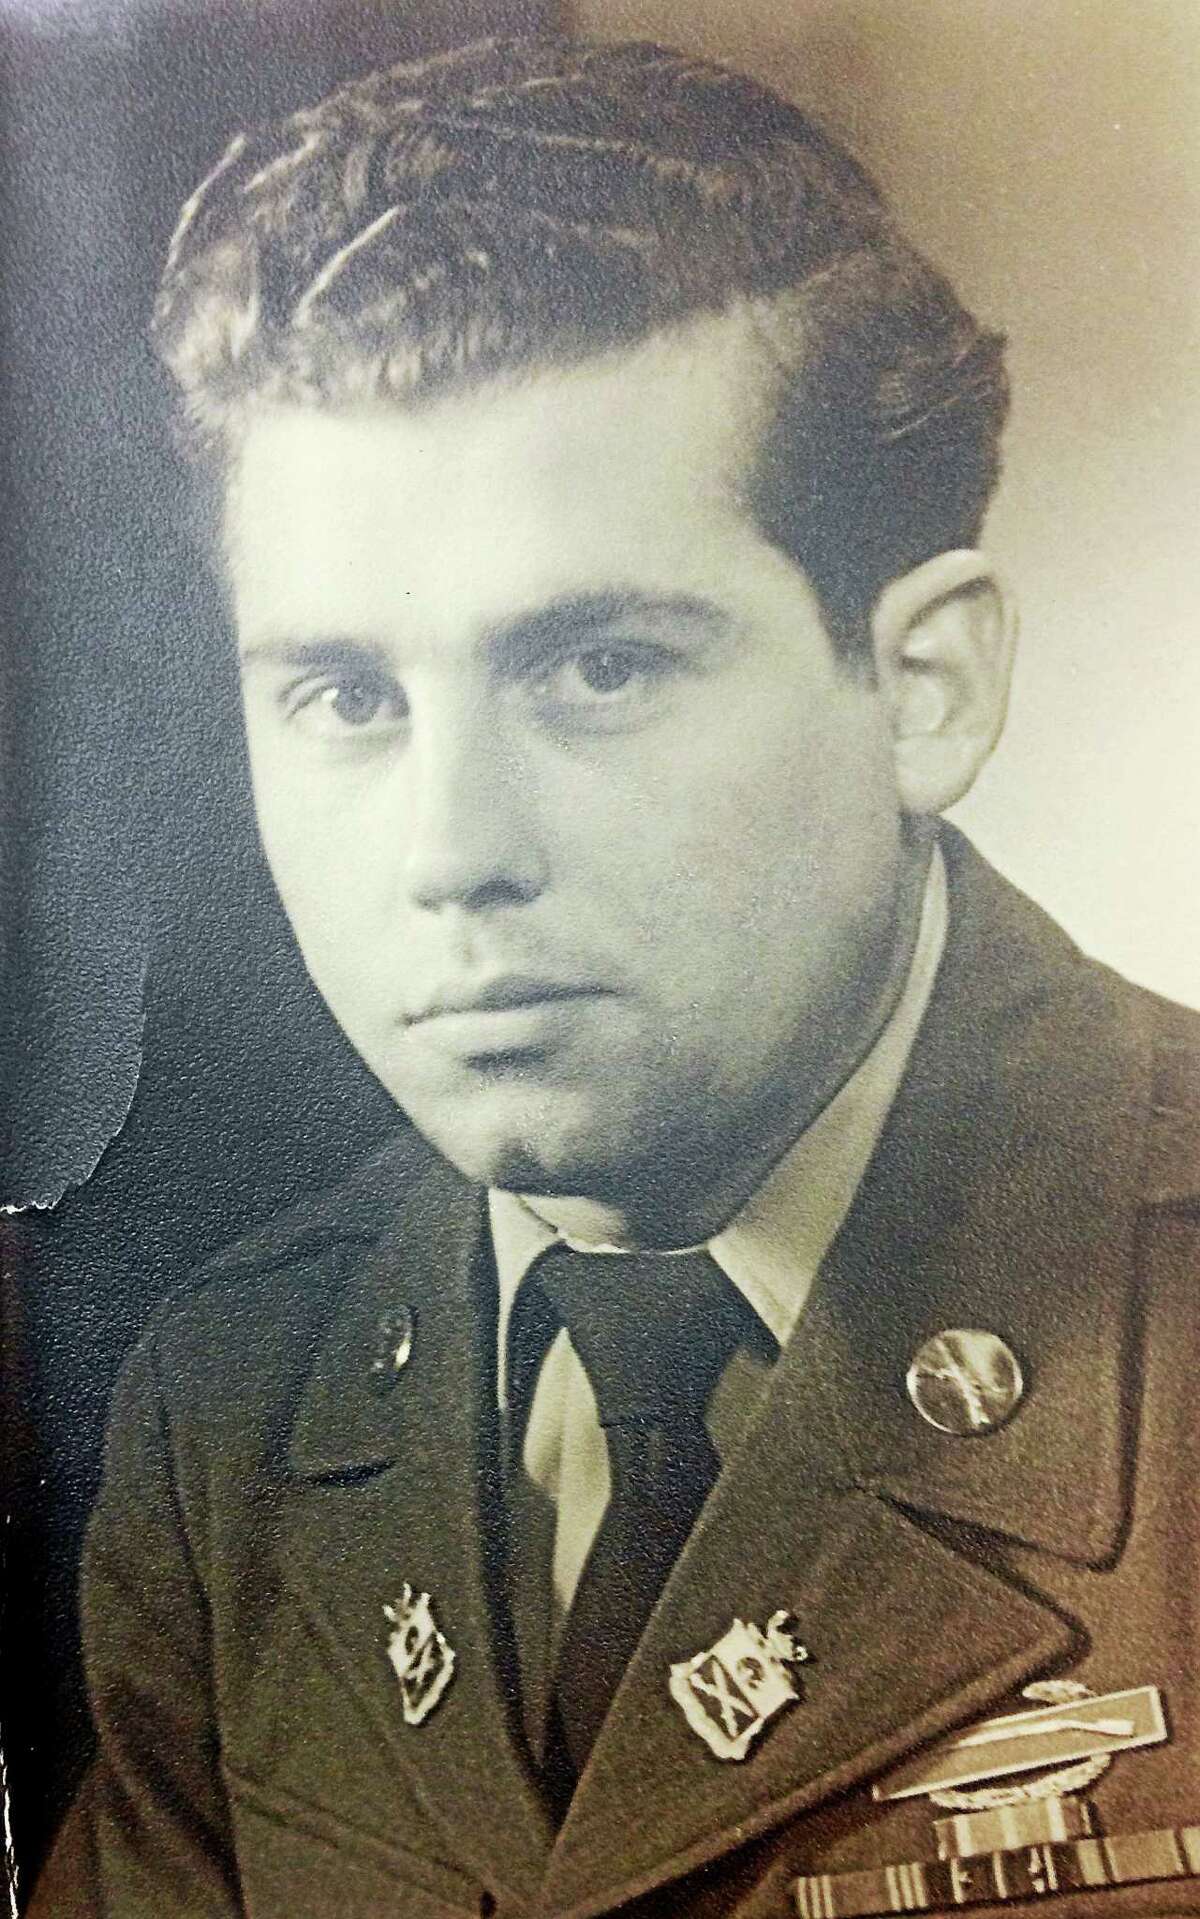 Robert C. Ruby in the Army during WWII.